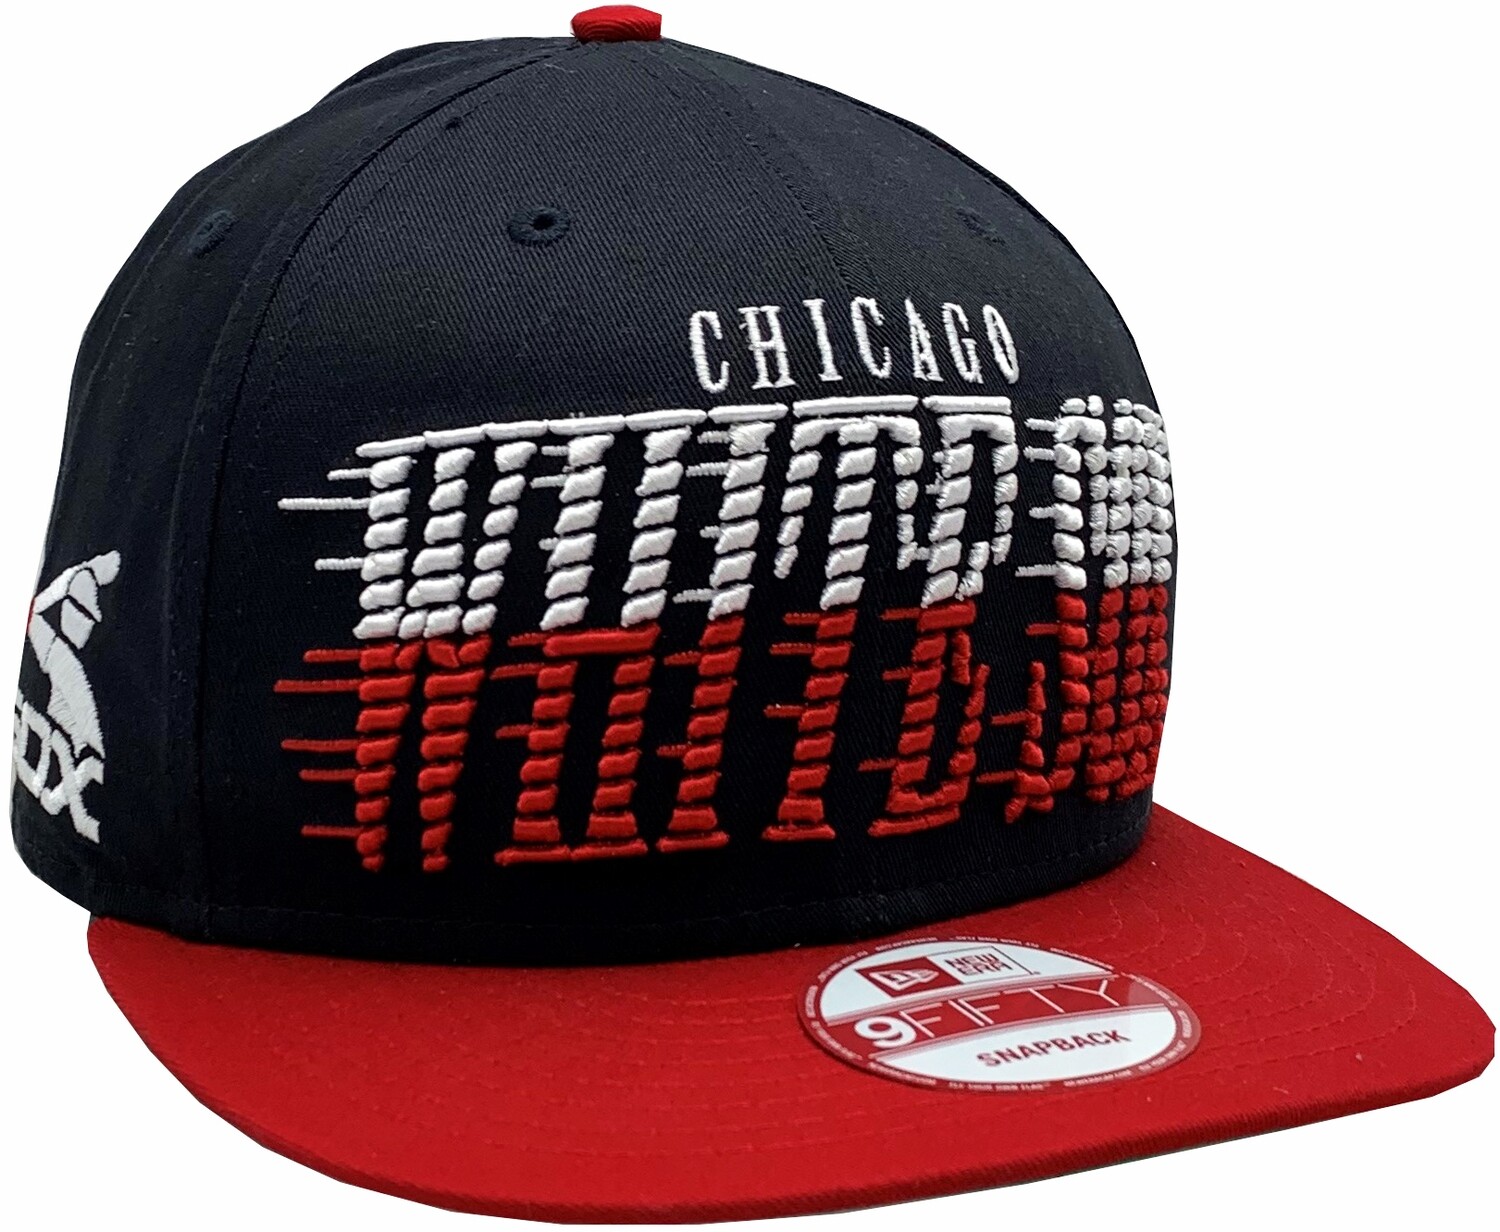 Chicago White Sox Sail Tip Snapback Blue/Red